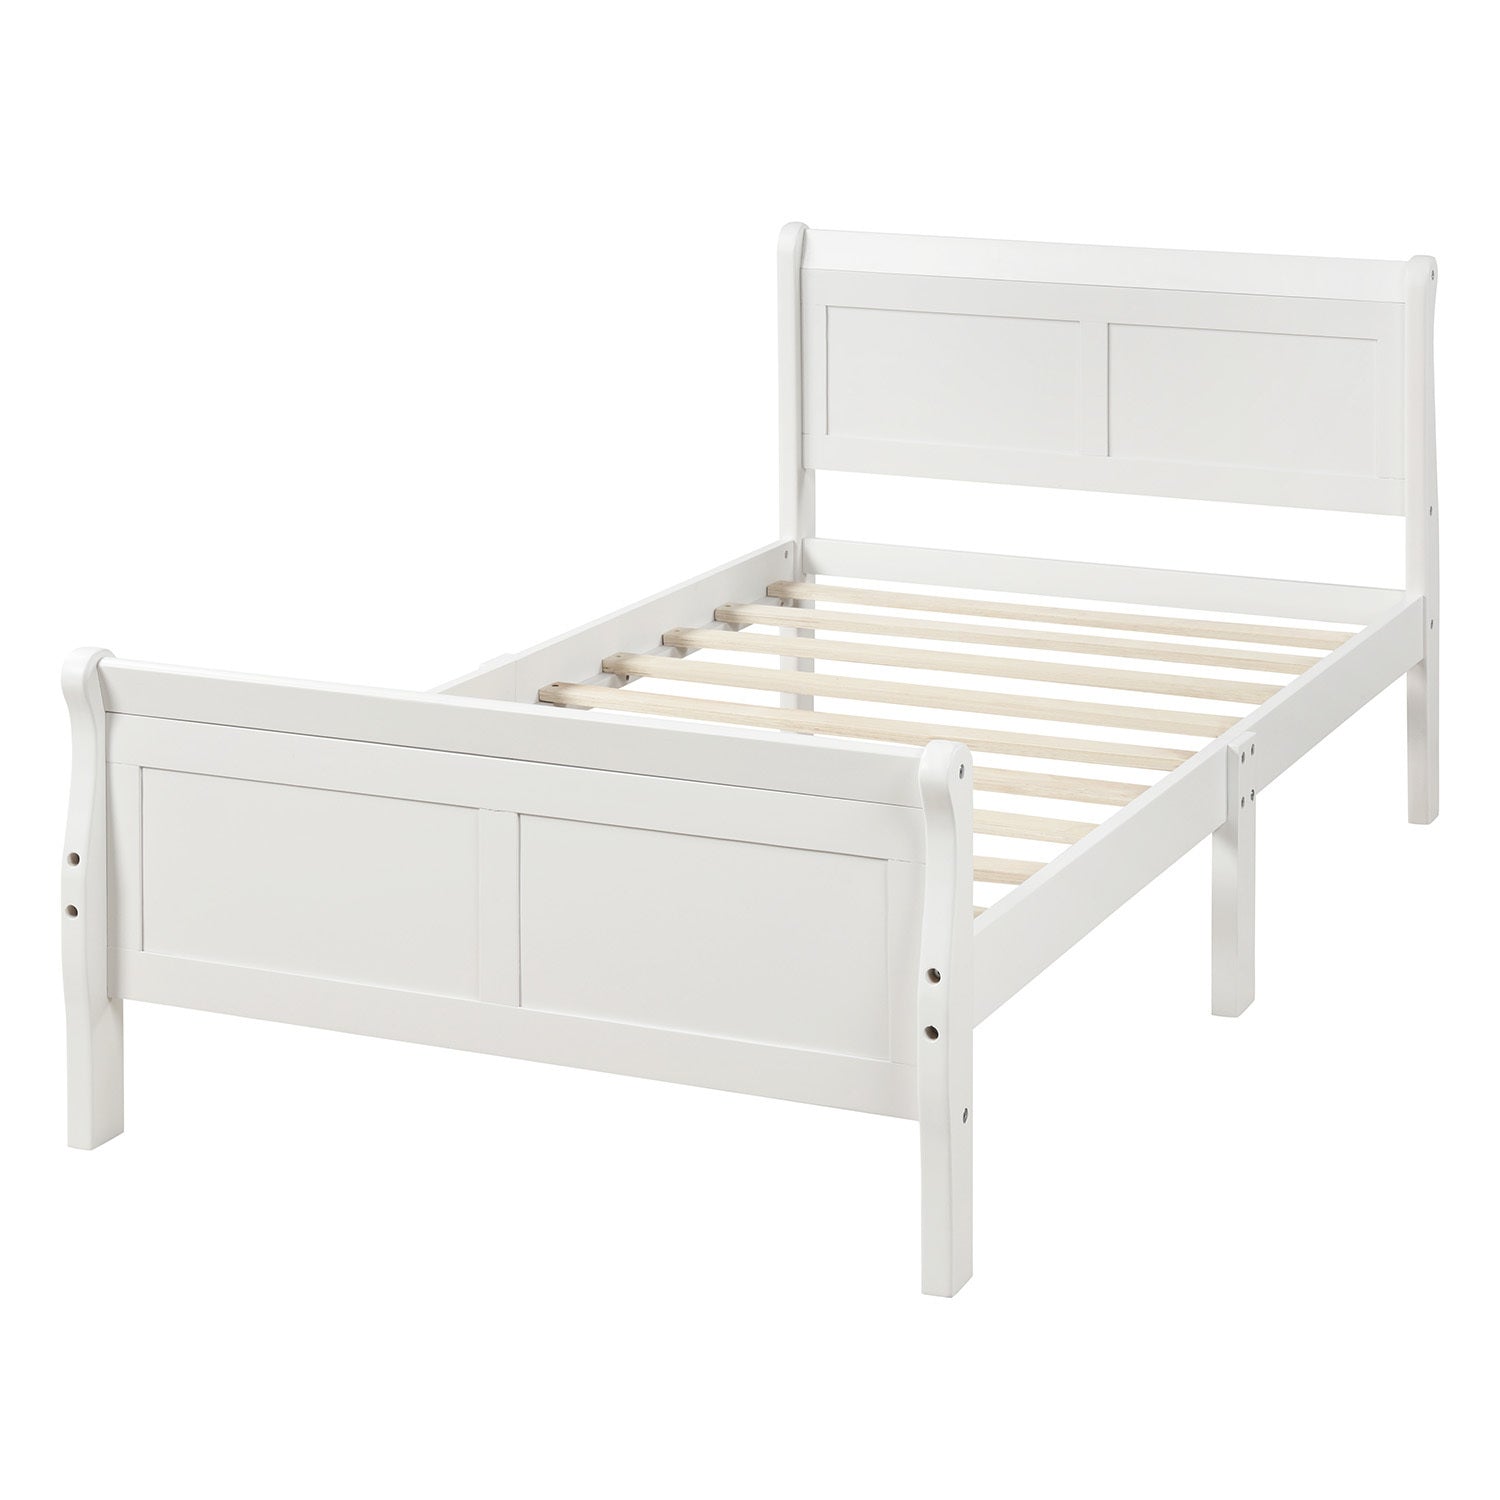 Wood Platform Twin Bed Frame - Sleigh Design with Headboard/Footboard - Mattress Foundation with Wood Slat Support